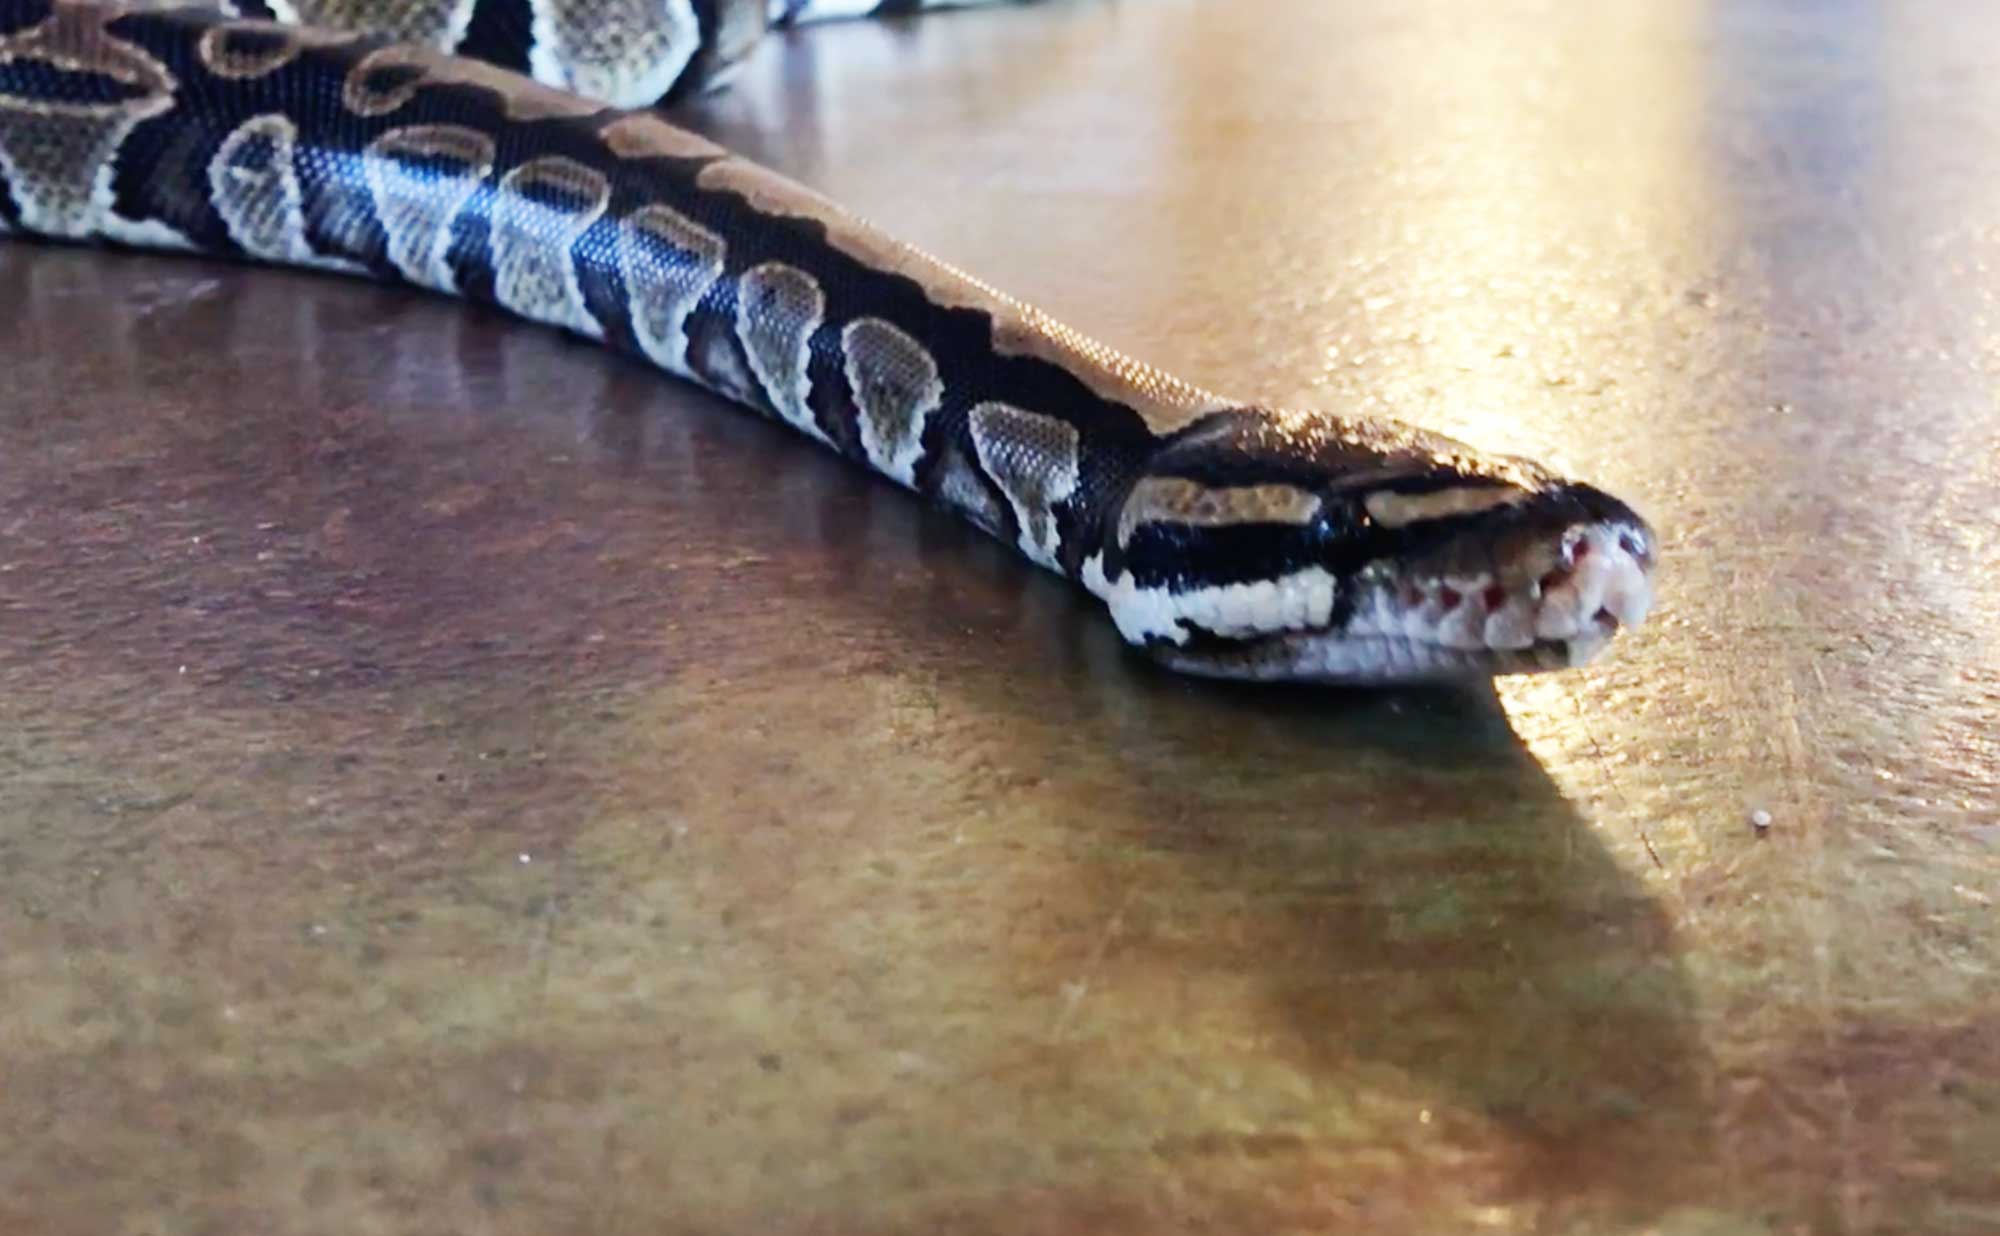 A ball python on the floor of a nature center.